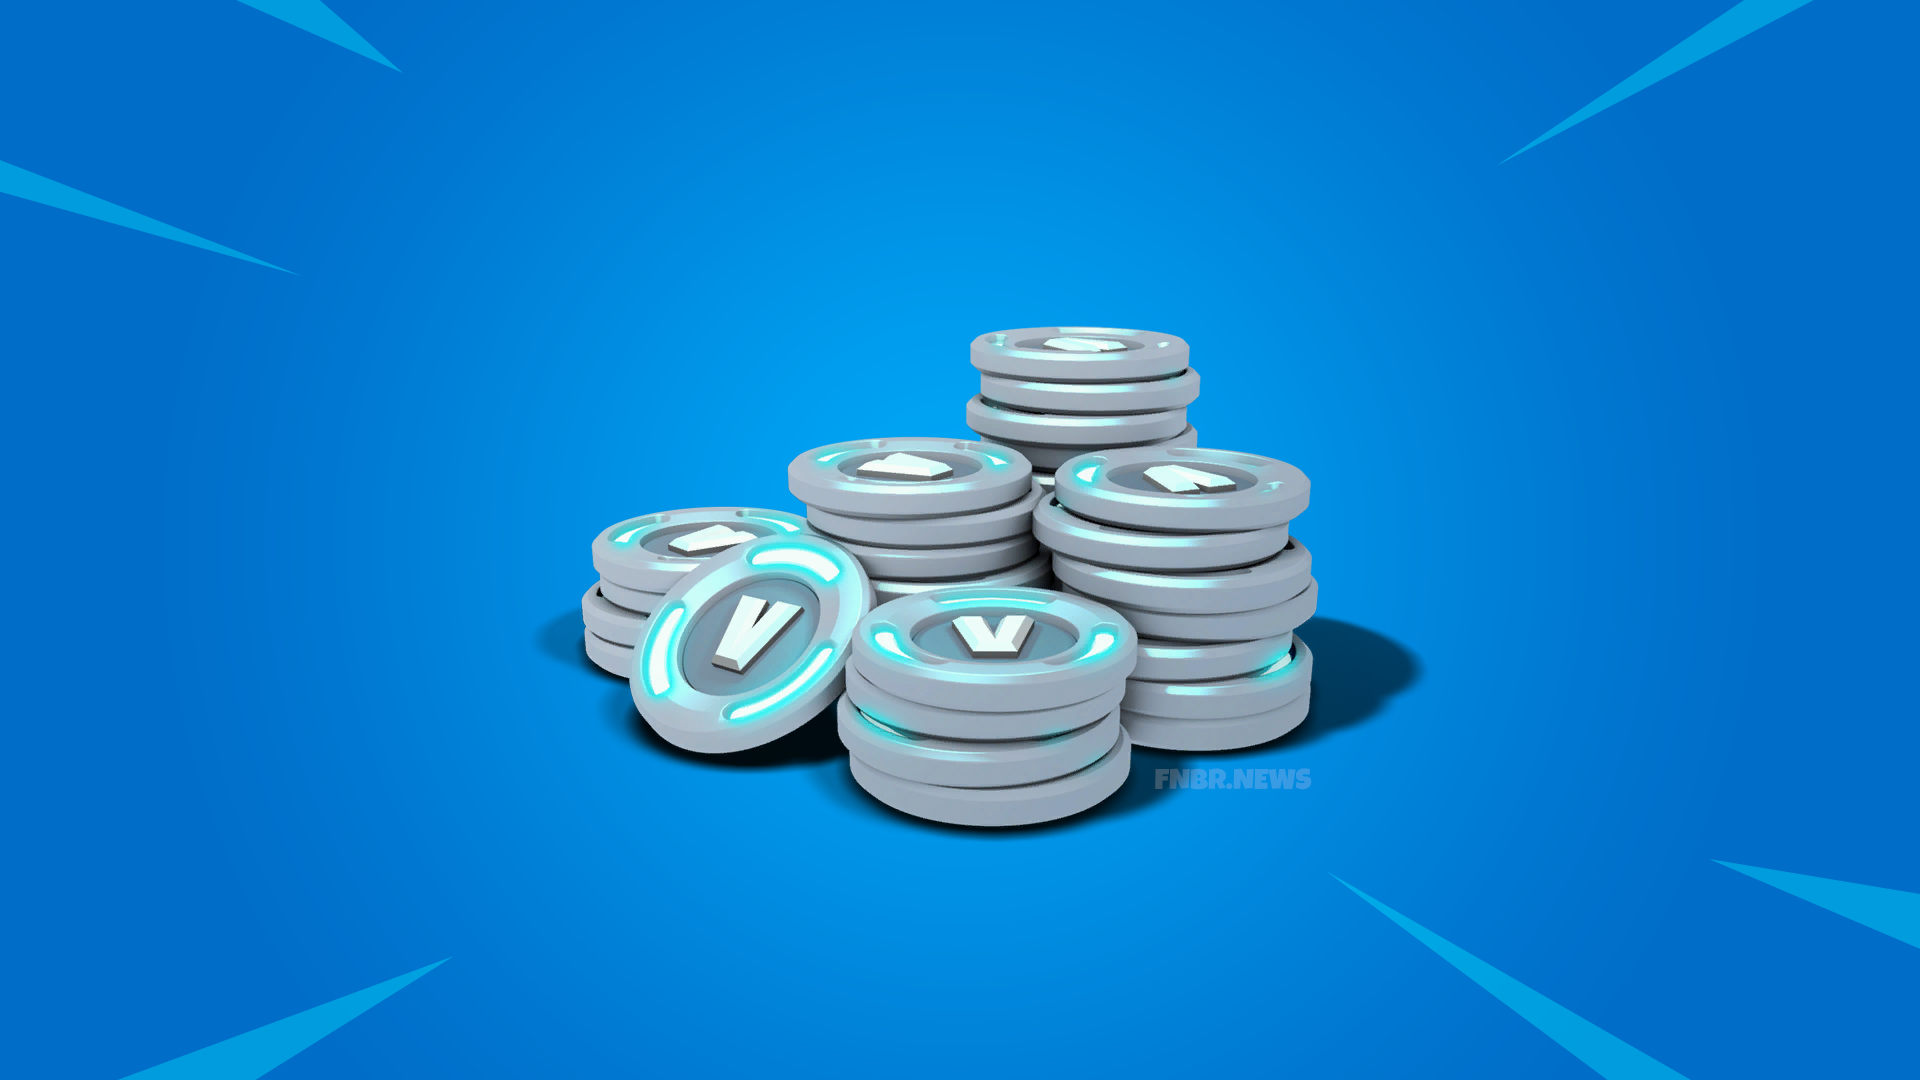 This is the apology gift Epic Games are sending out to wrongly banned Fortnite players